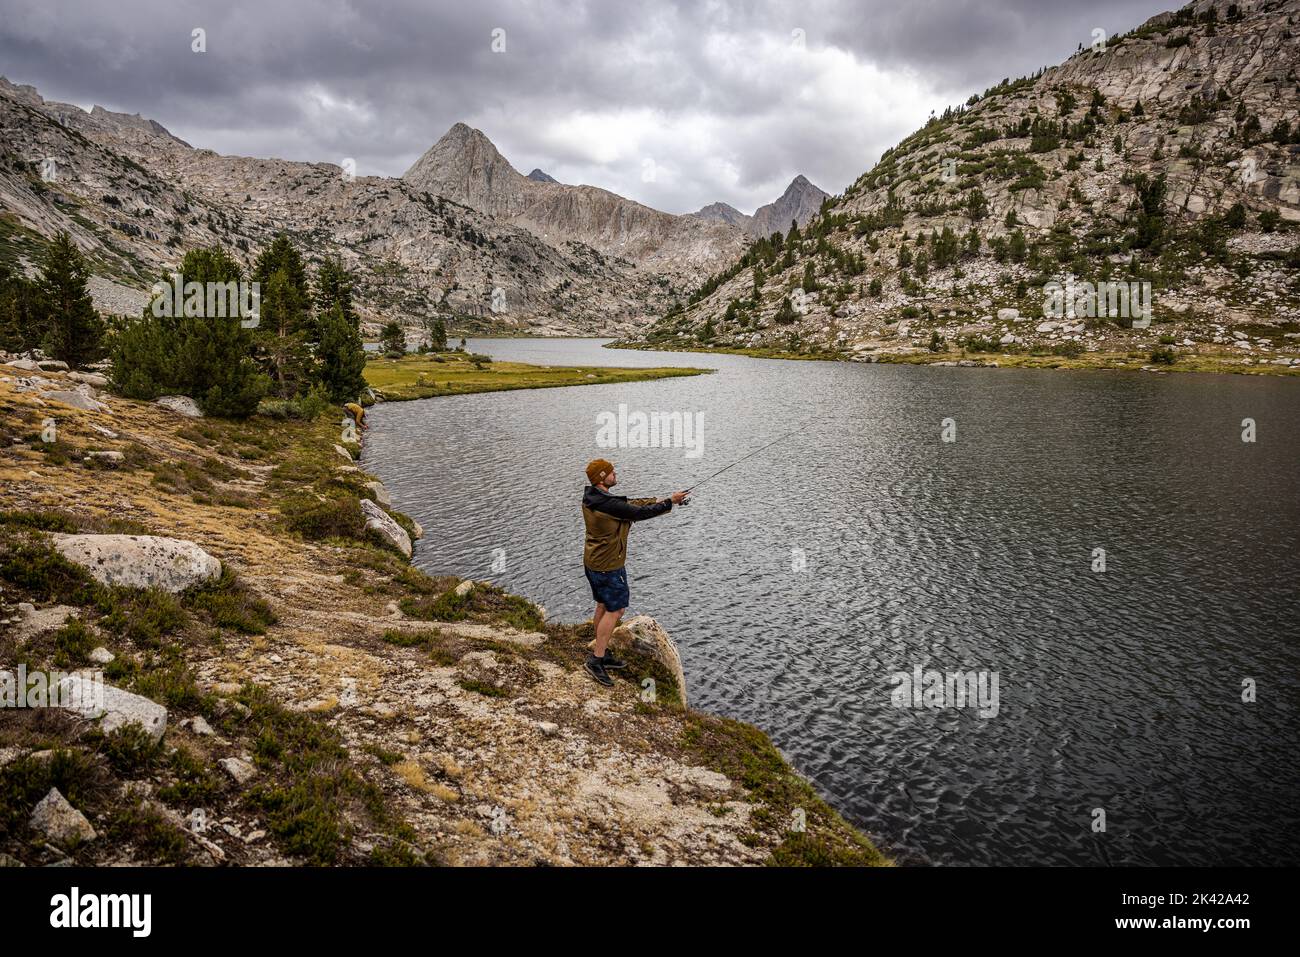 Casting out a line at an alpine lake. Stock Photo